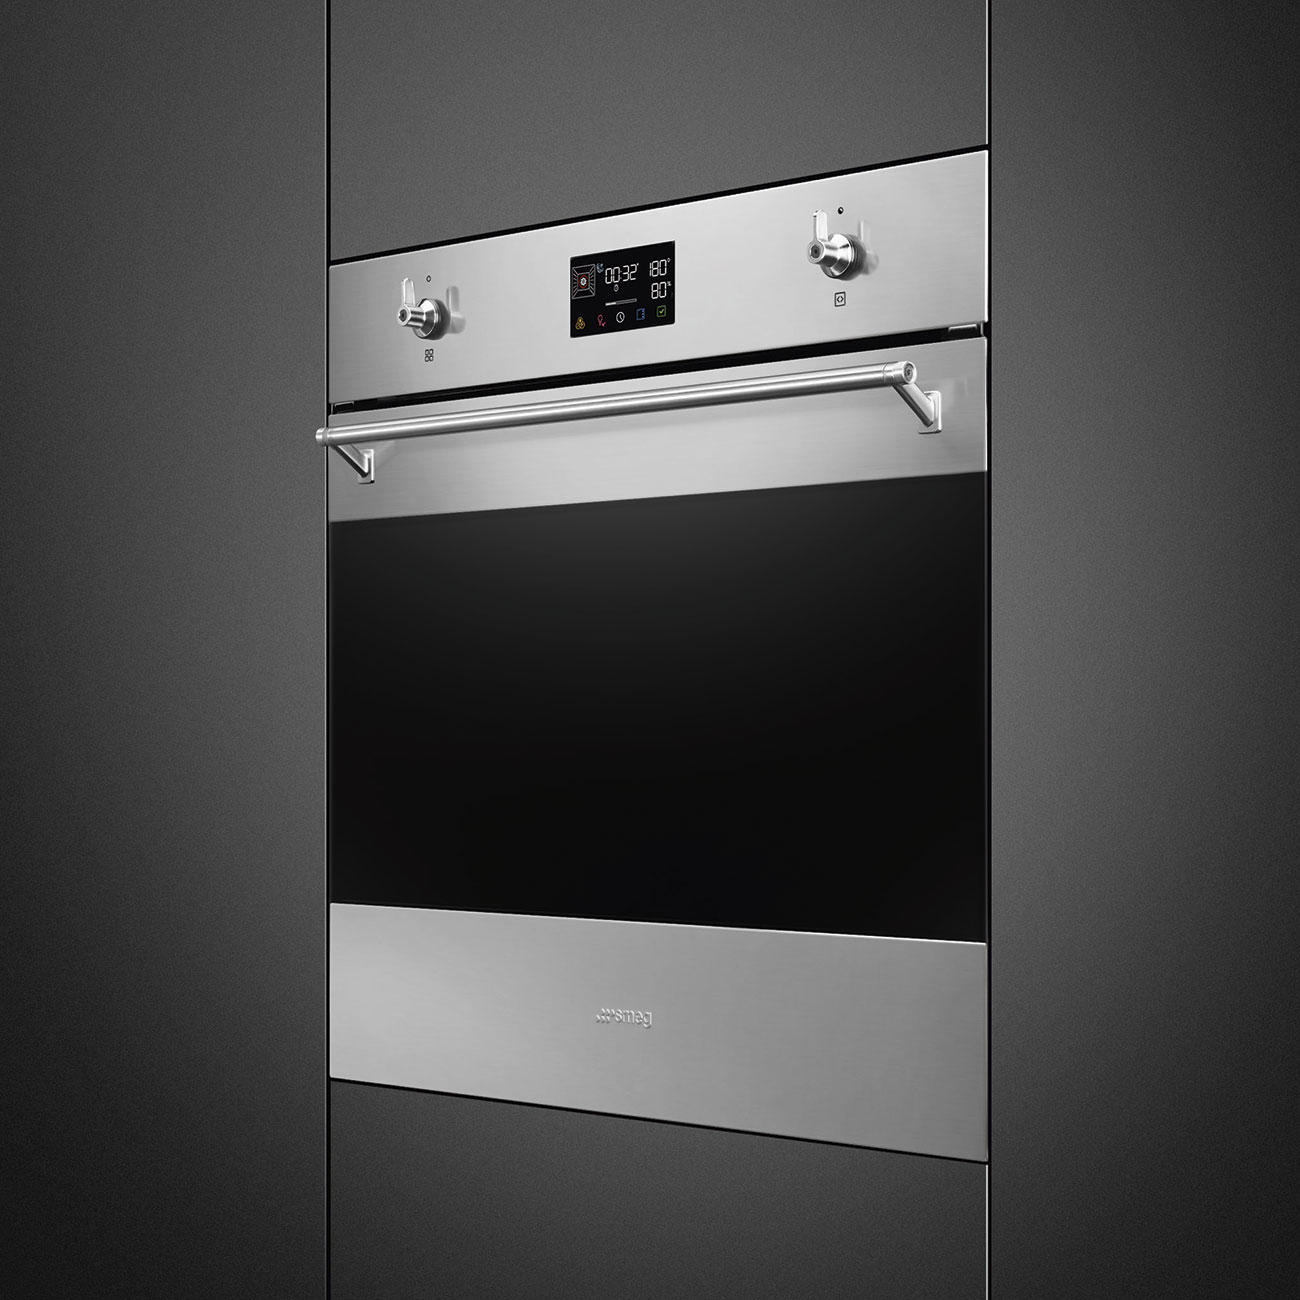 Stainless steel SteamOne Galileo Oven.  60cm. Built-in. Smeg_3